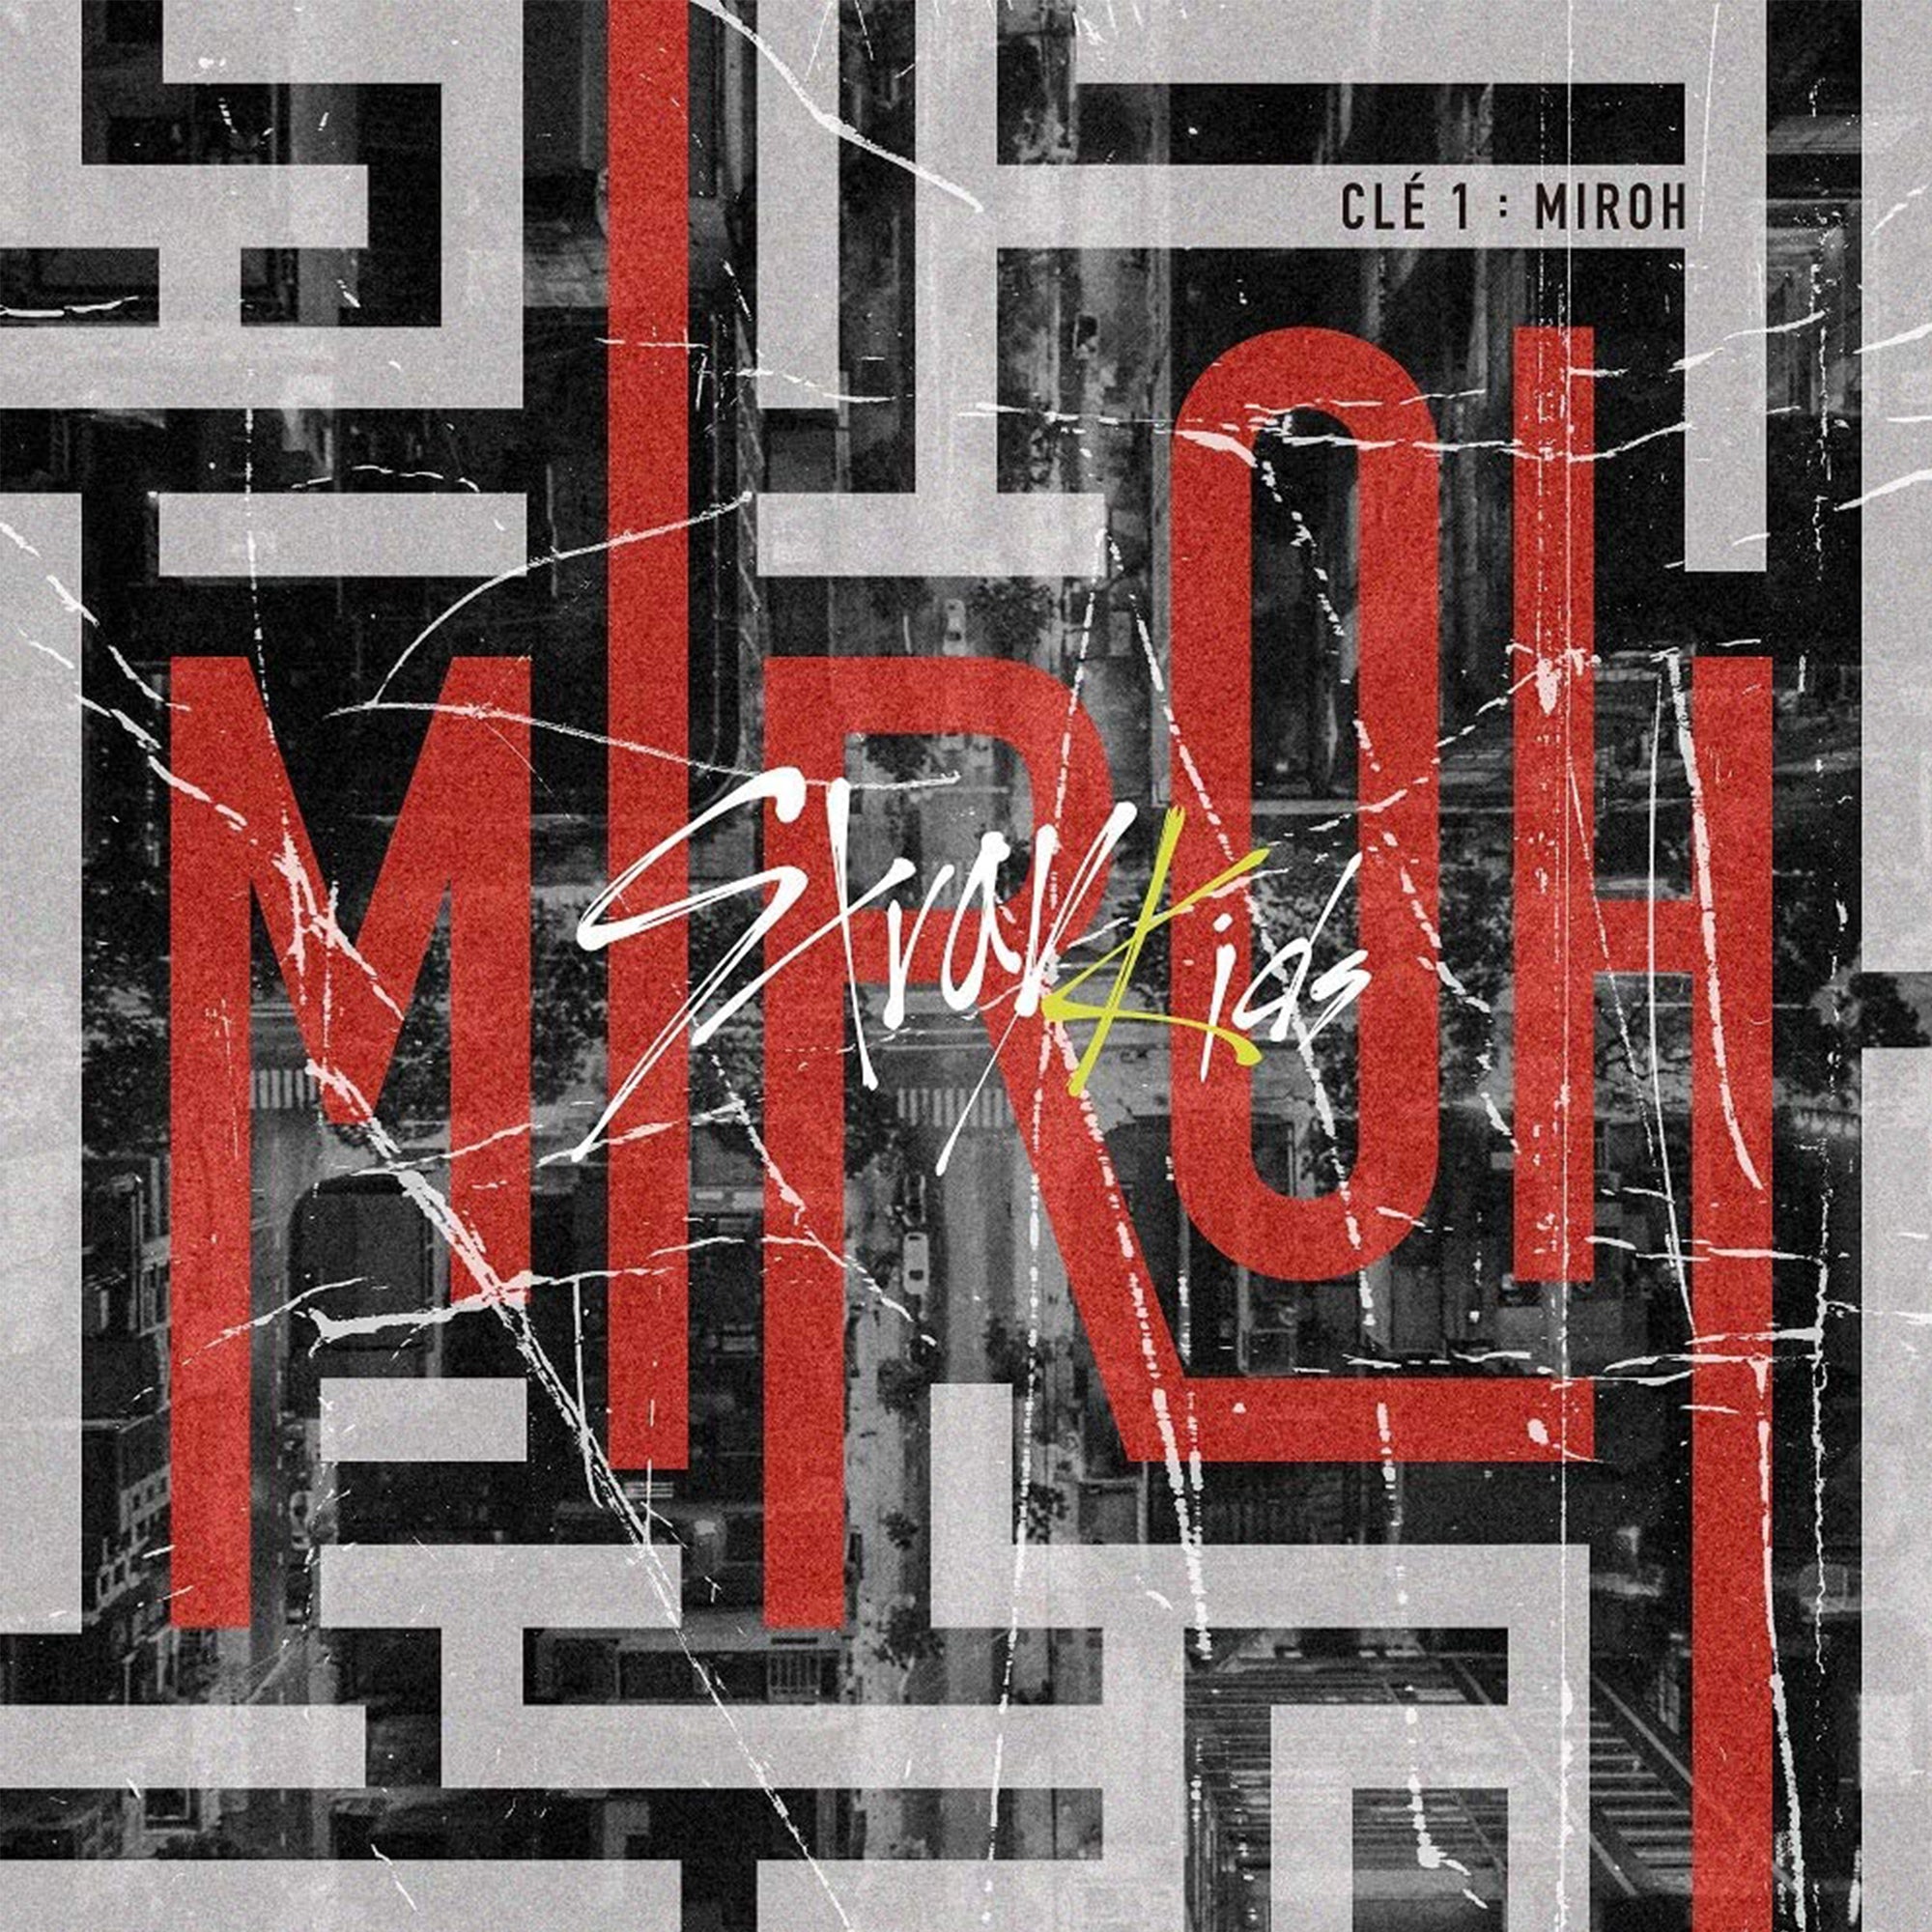 CLE 1 : MIROH